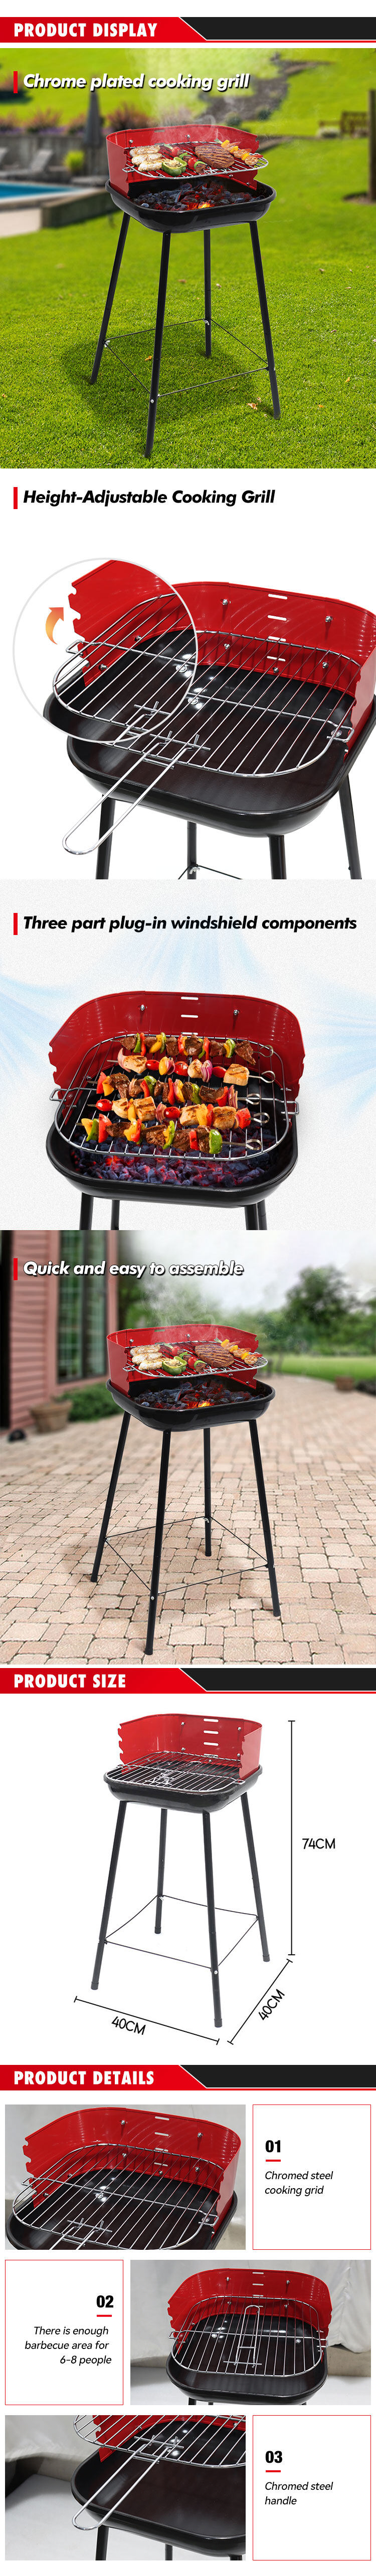 Product detail of Portable Bbq Grills.jpg